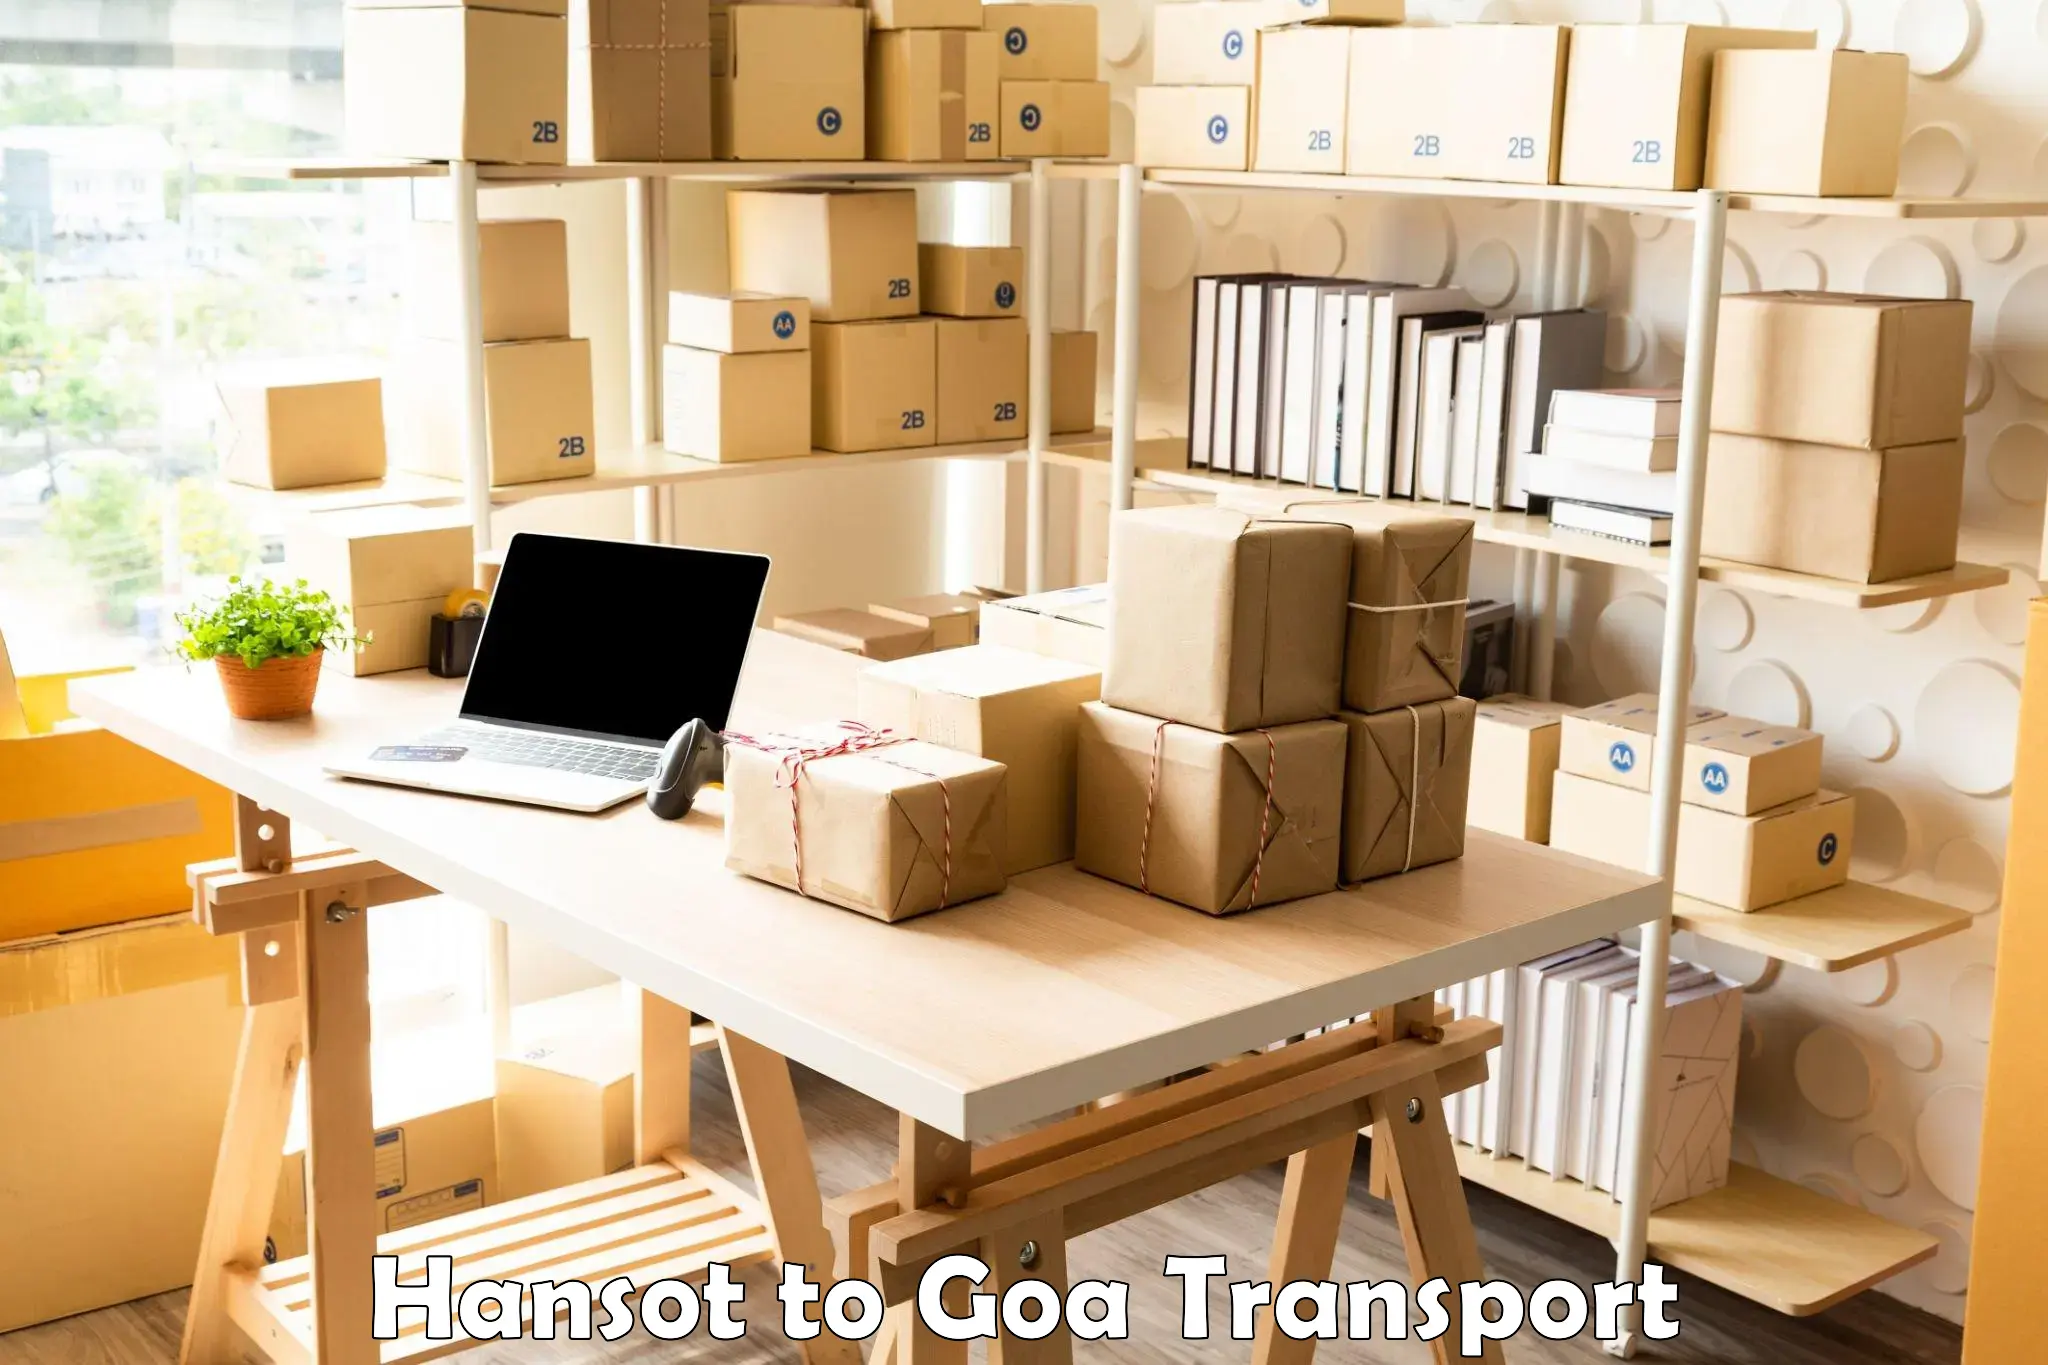 Interstate transport services Hansot to Goa